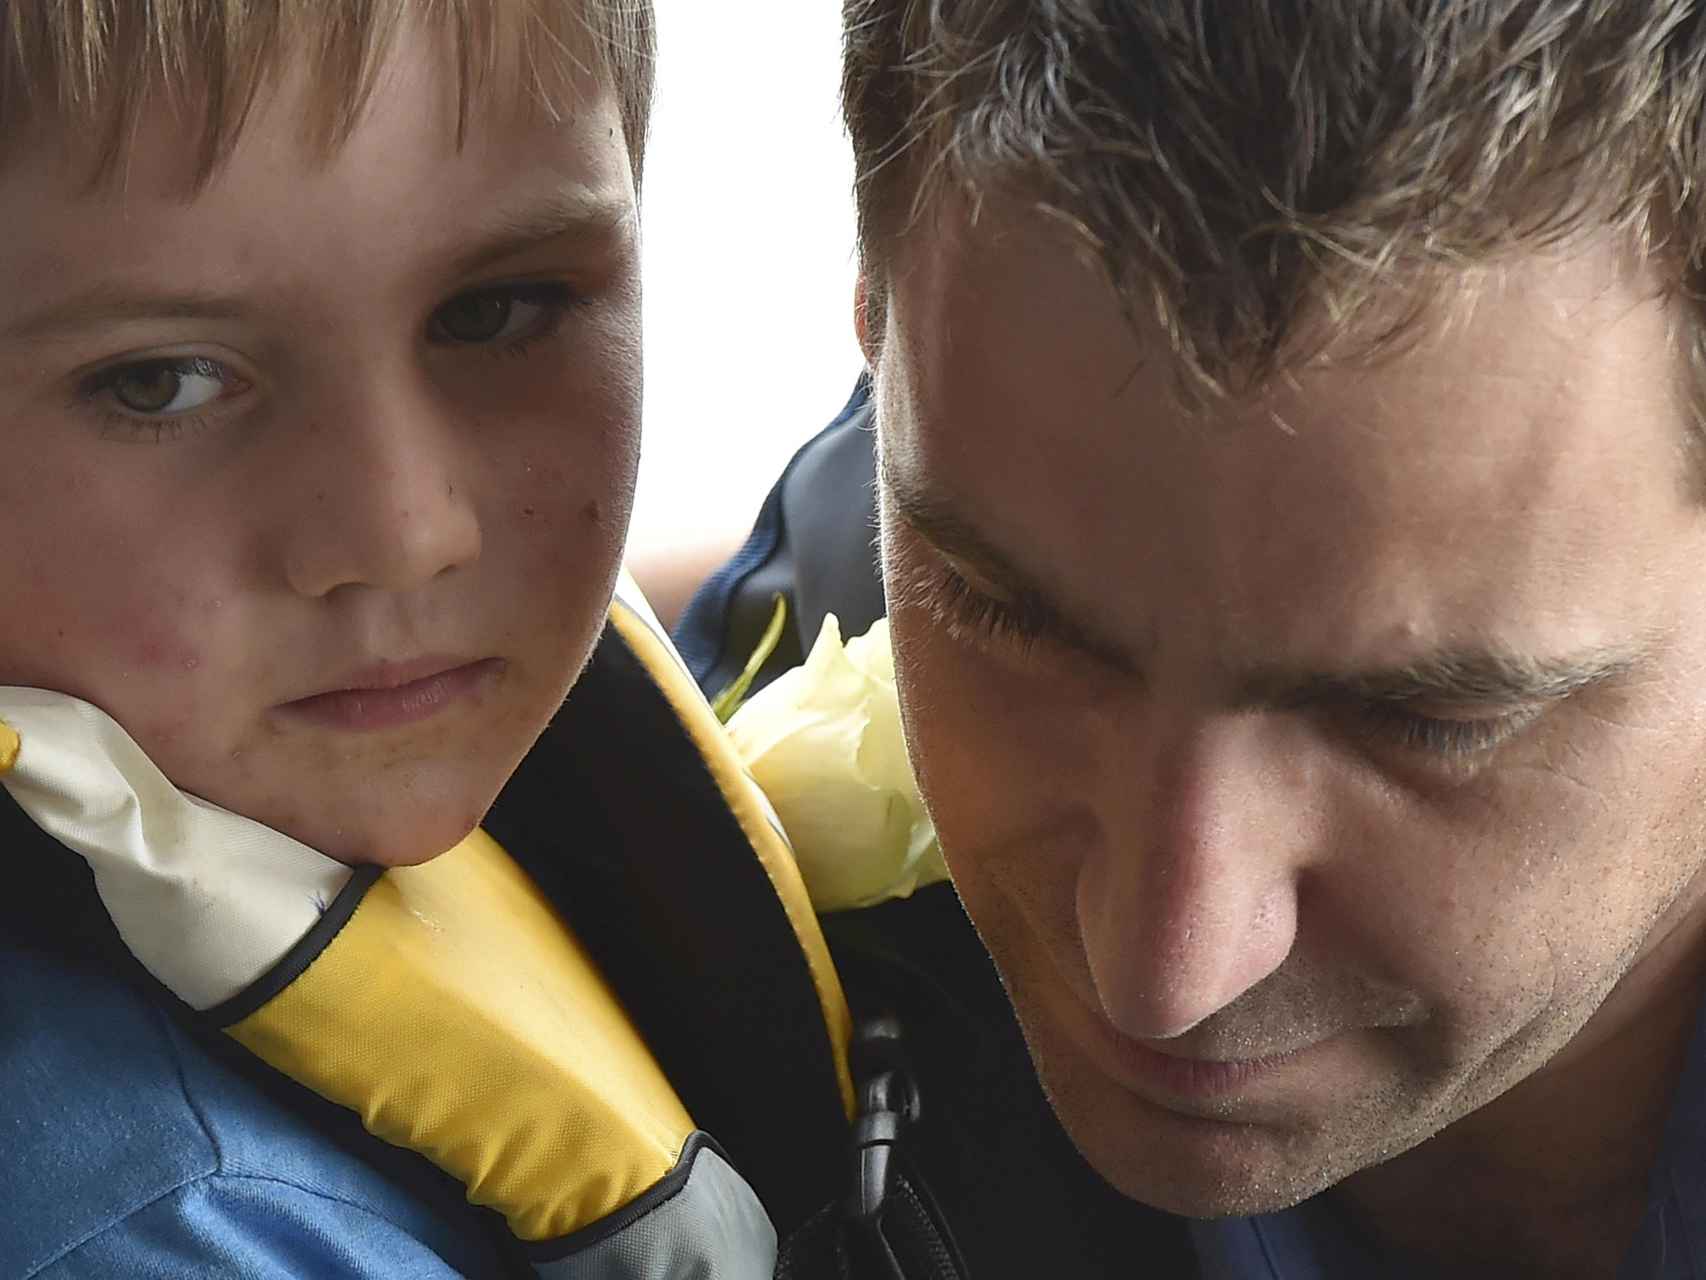 Brendan Cox, the husband of murdered Labour Party MP Jo Cox, travels by boat along the River Thames with their son to attend a service at Trafalgar Square